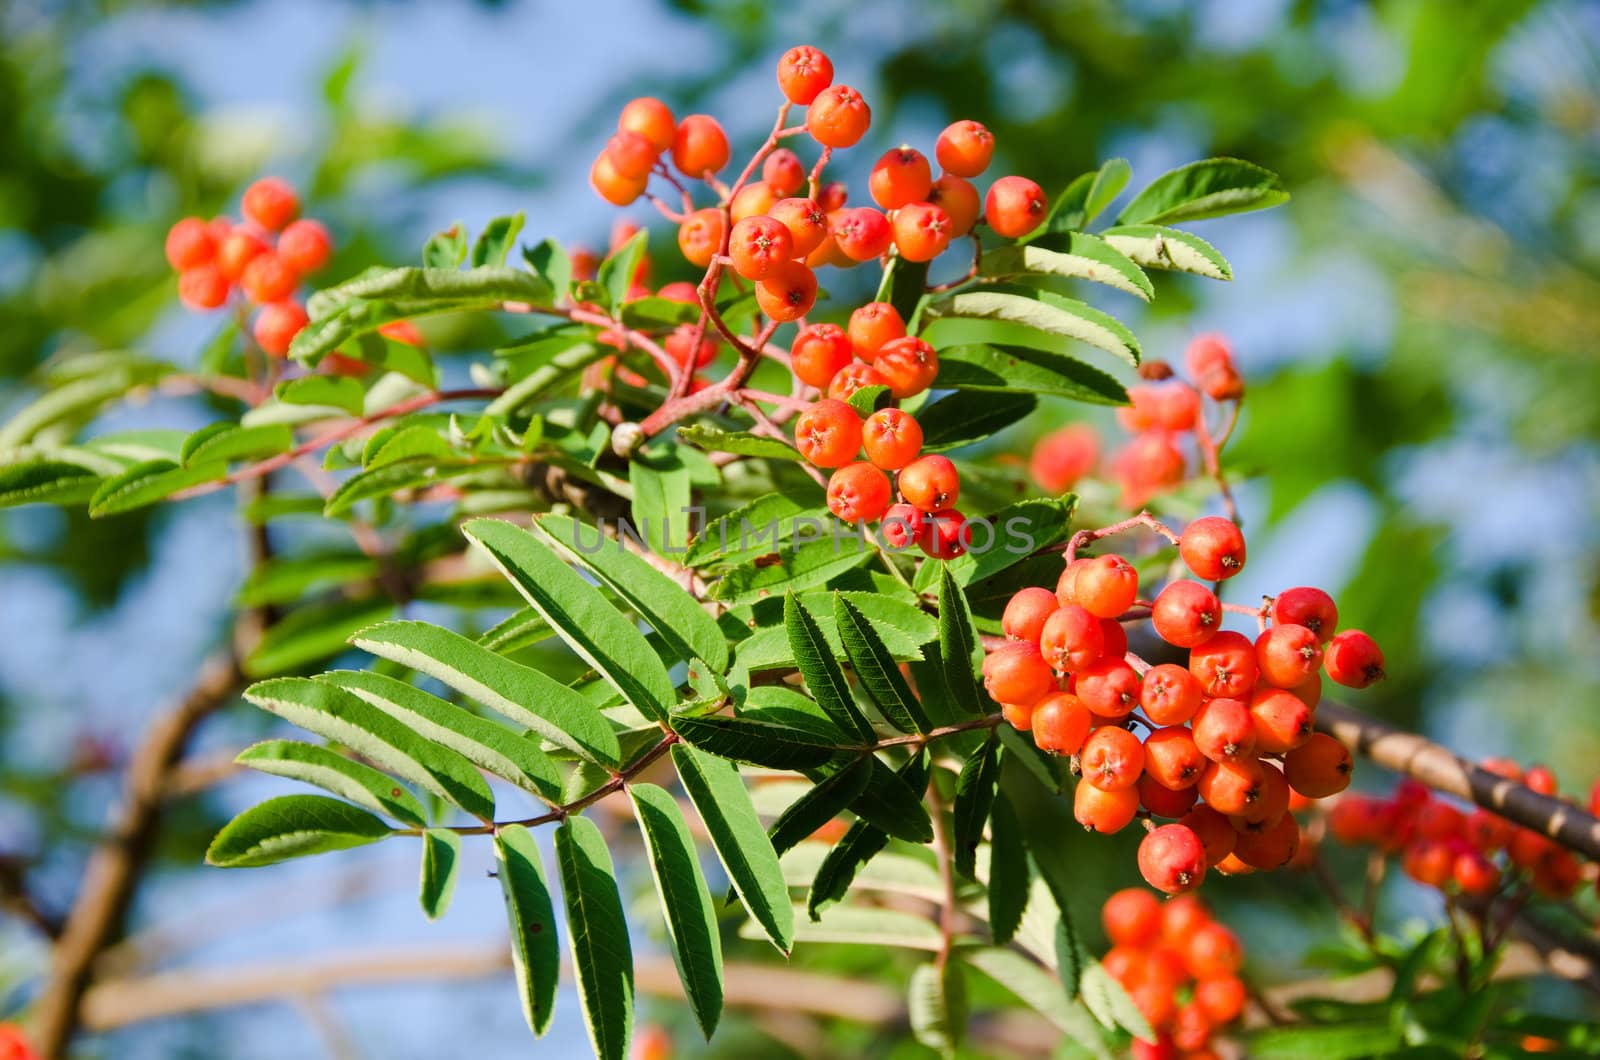 Ripe rowan fruits on the tree with blue sky background, Sorbus aucuparia